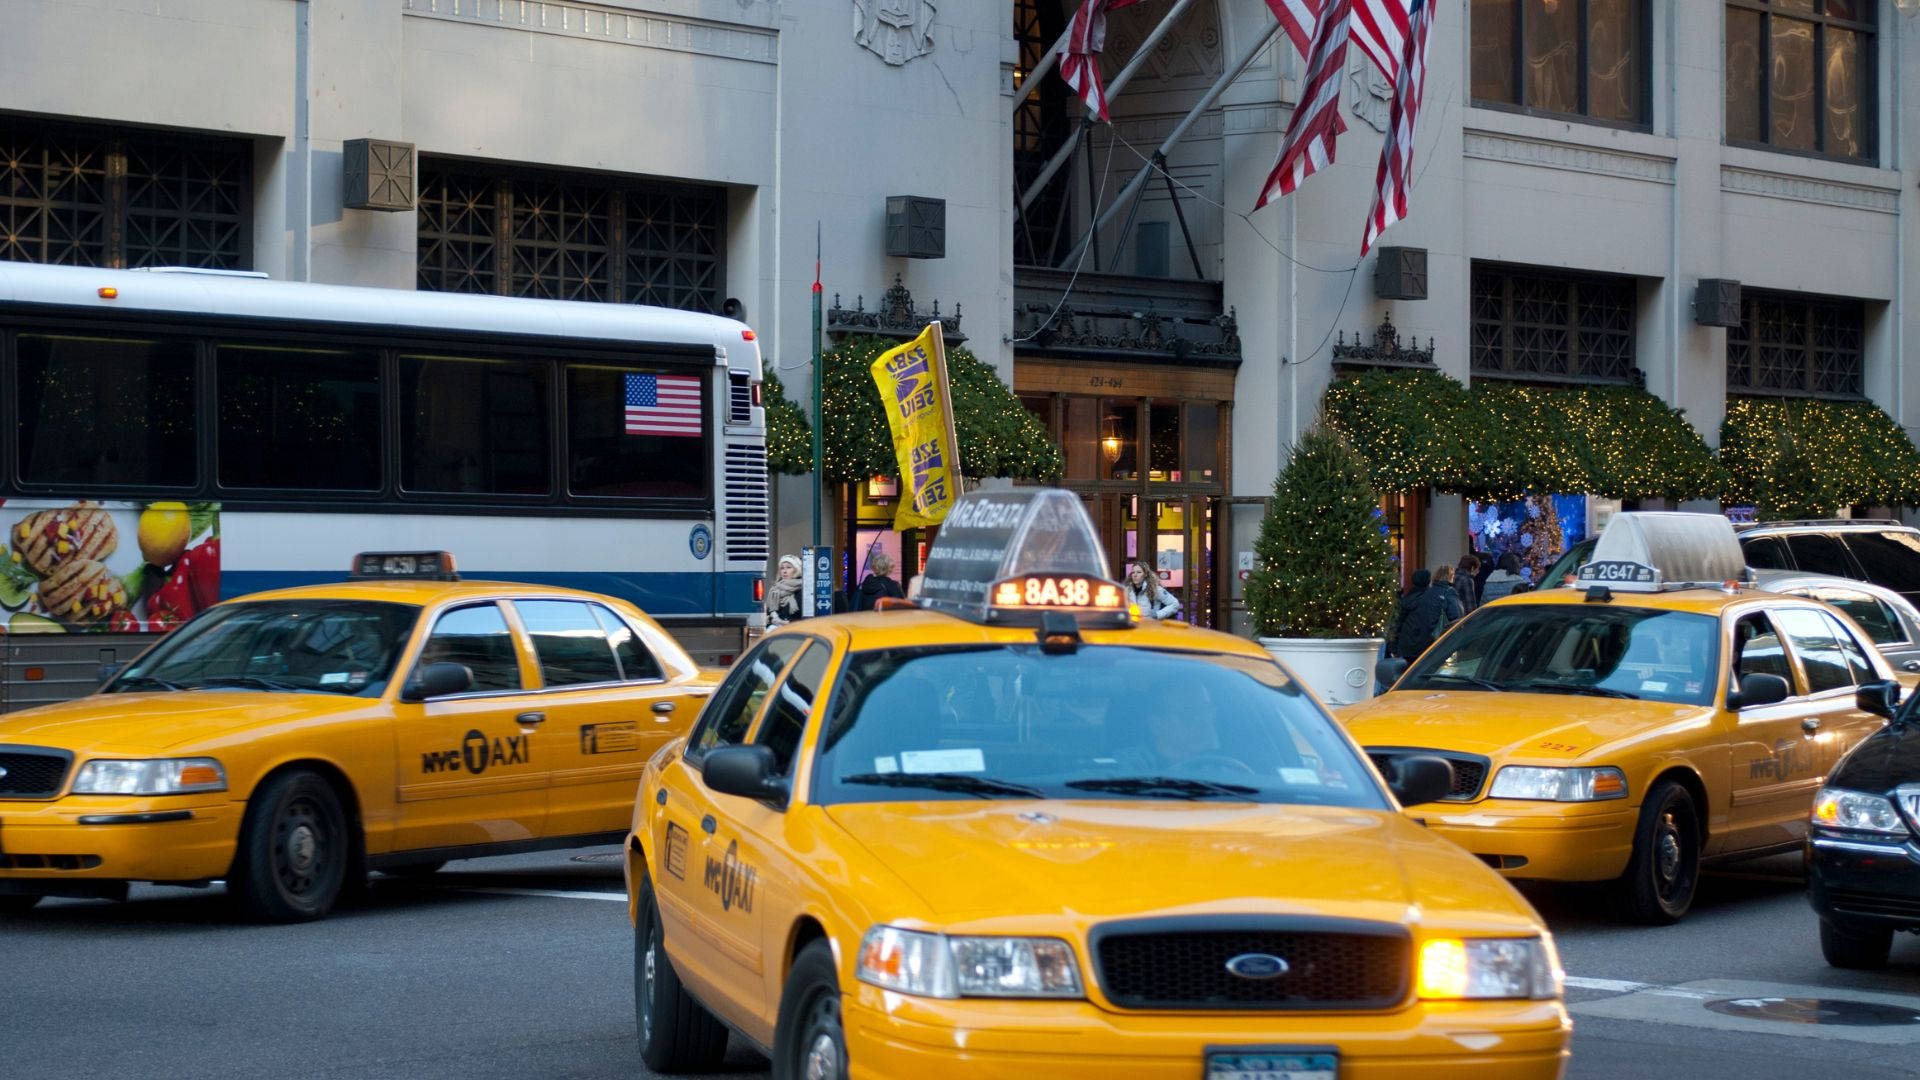 Yellow Cab Taxi In Lord&Taylor New York City Wallpaper